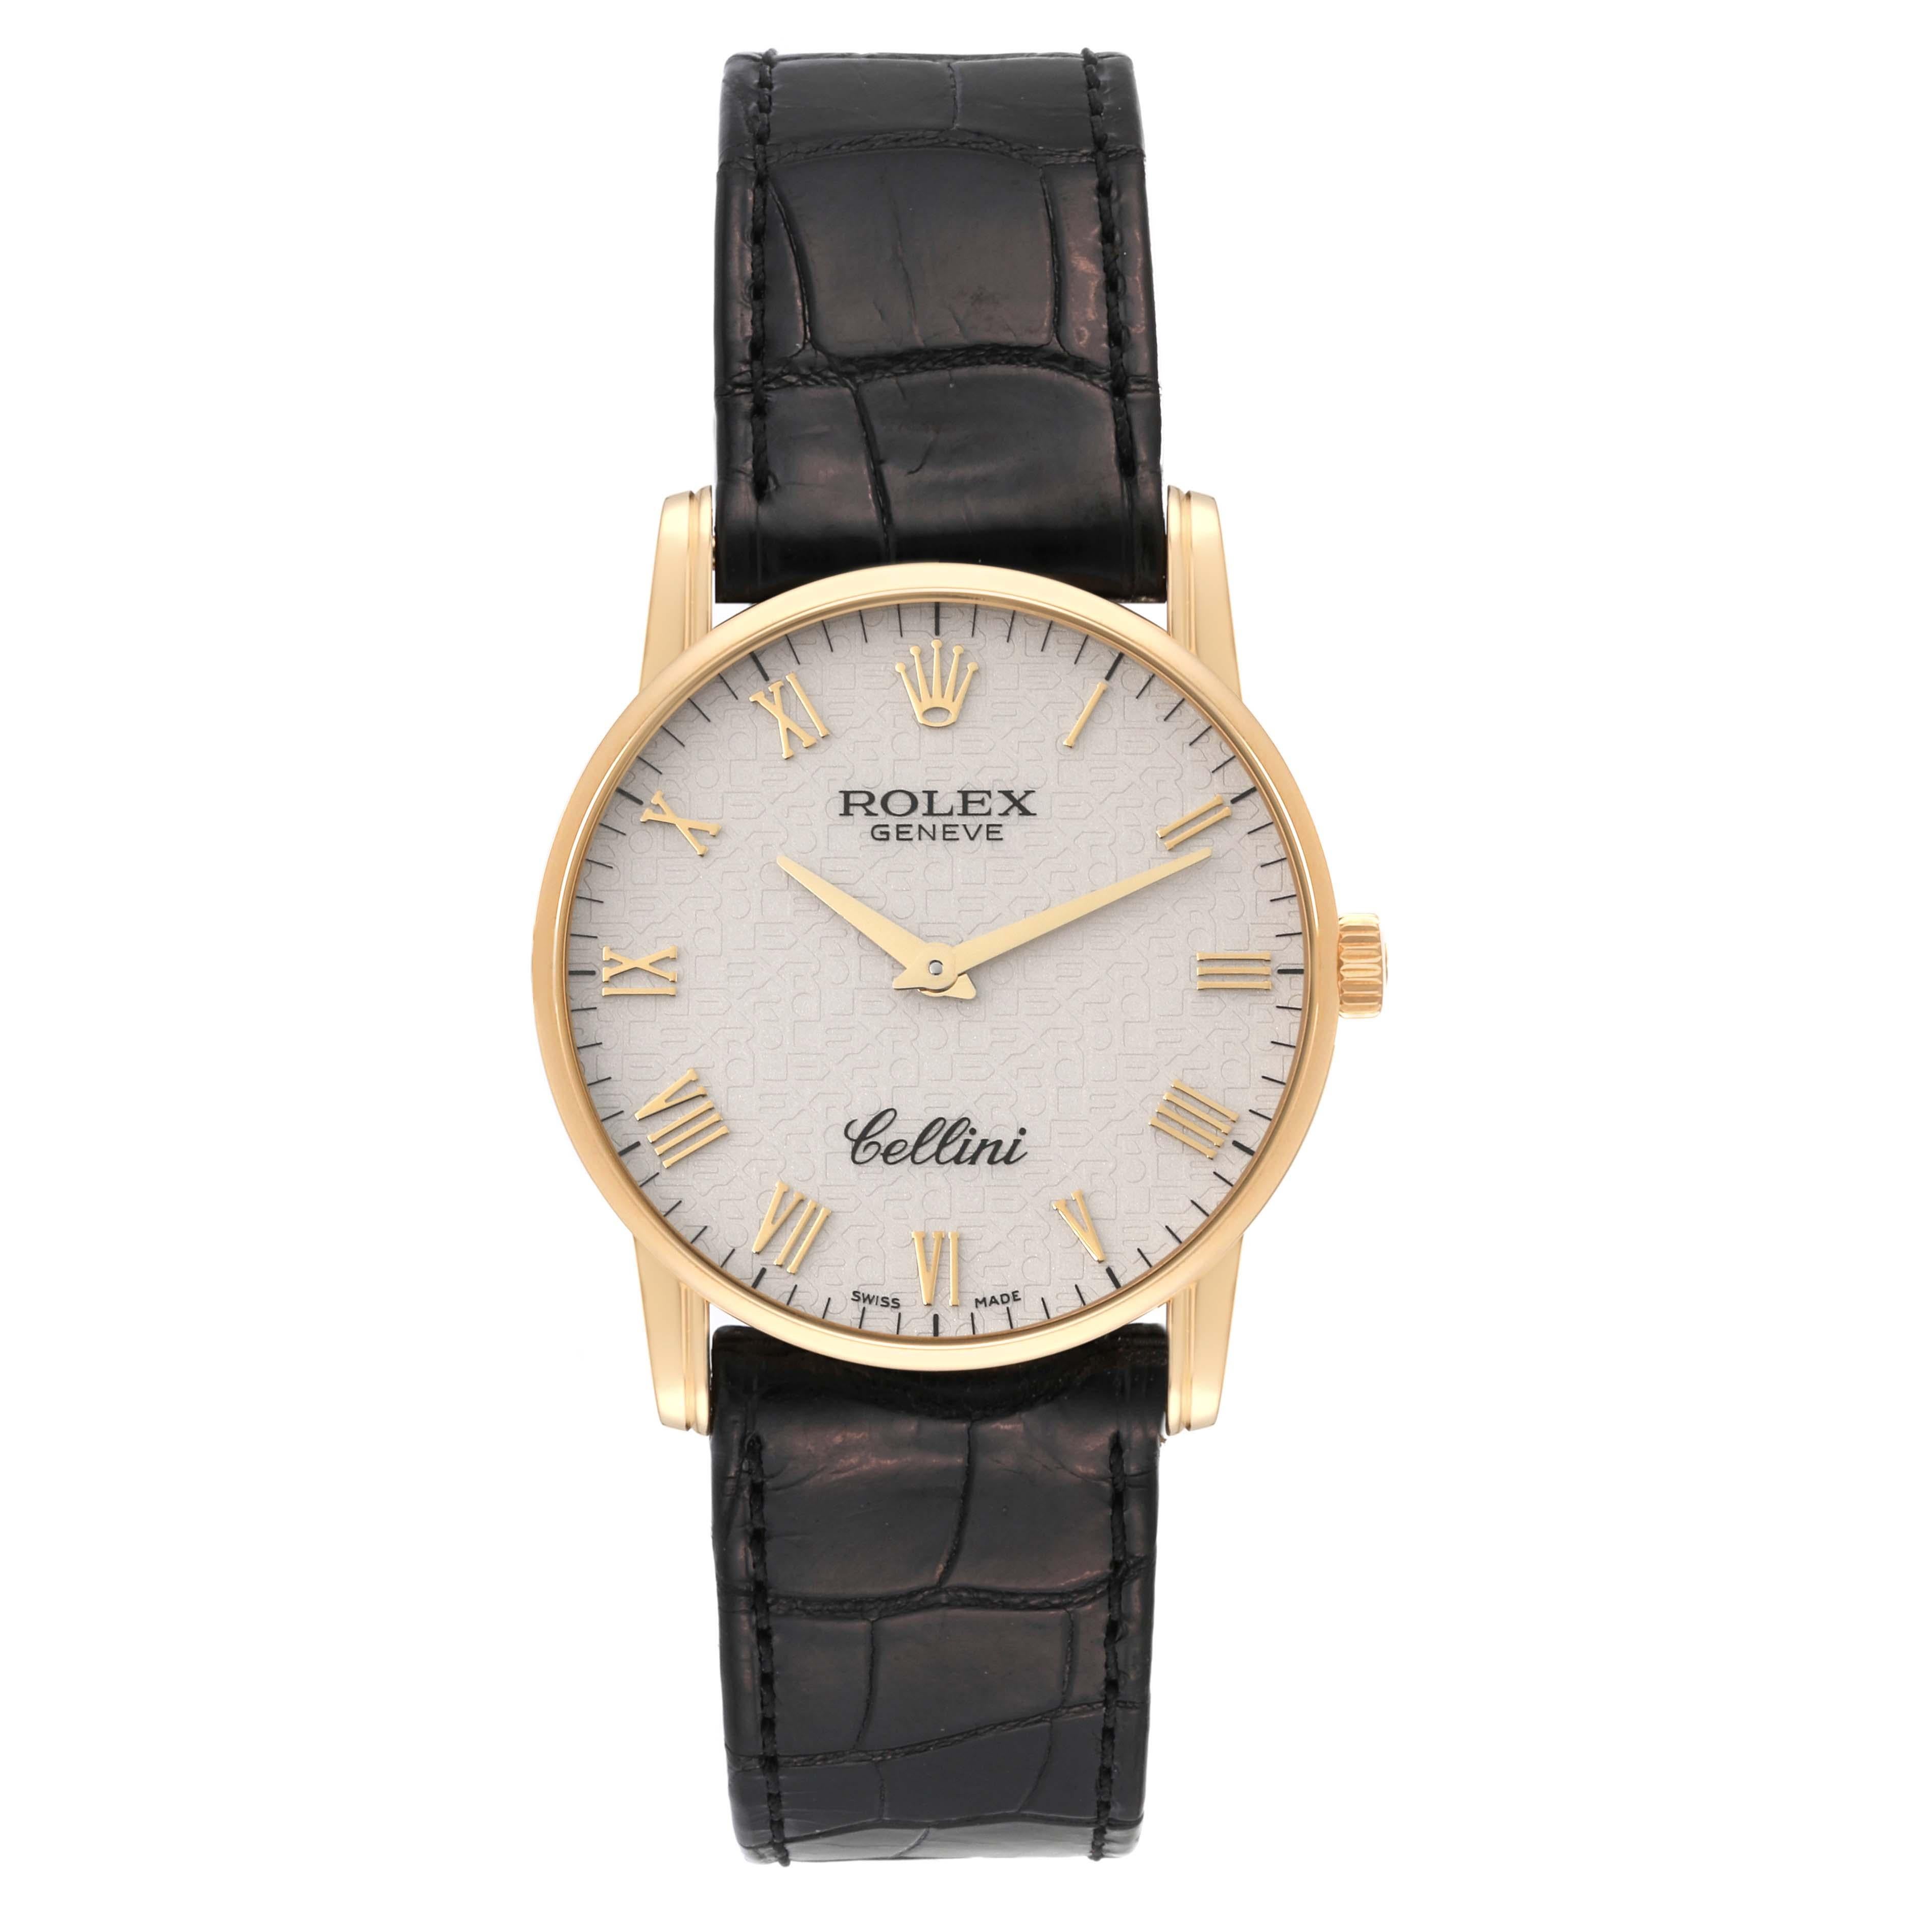 Rolex Cellini Classic Yellow Gold Ivory Anniversary Dial Mens Watch 5116 1